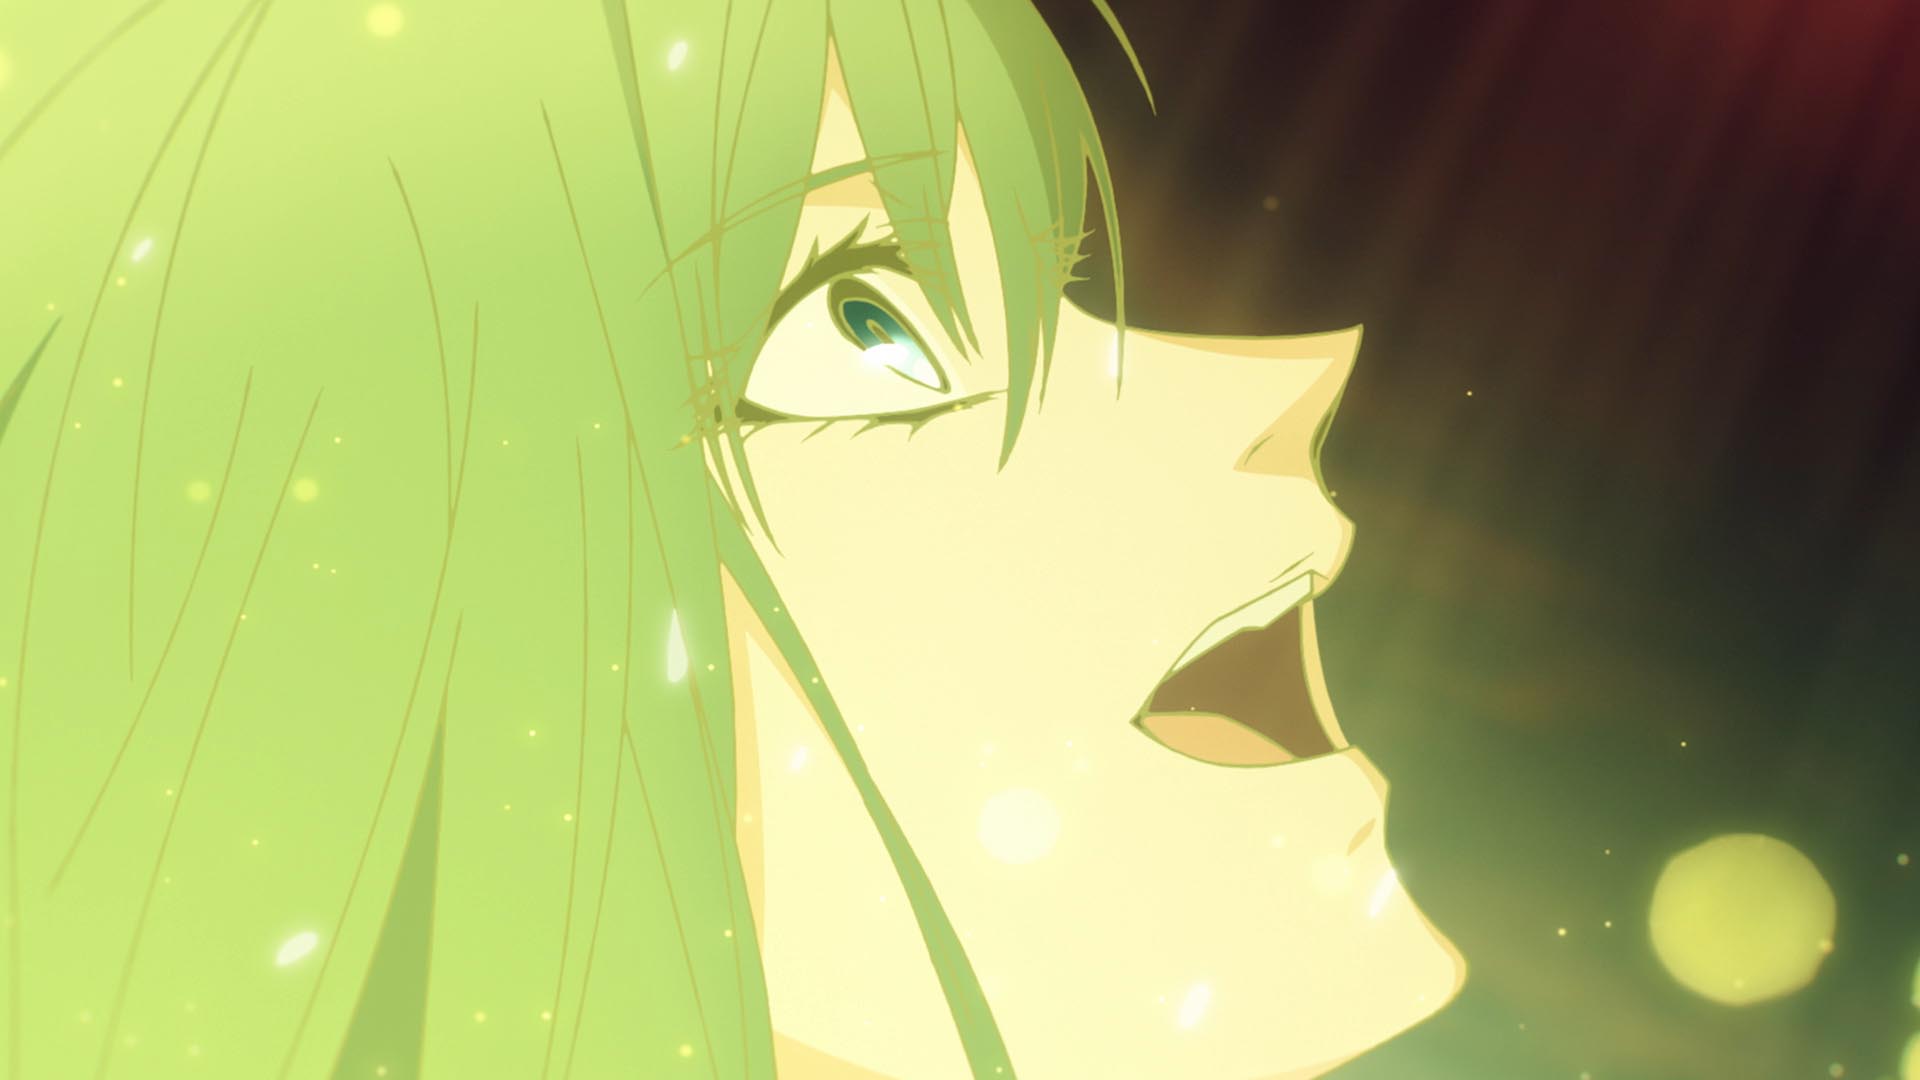 HD desktop wallpaper featuring a character from Fate/strange fake anime with green hair and an expressive face against a sparkly, green-tinted background, ideal for fans of the series looking for a vibrant backdrop.